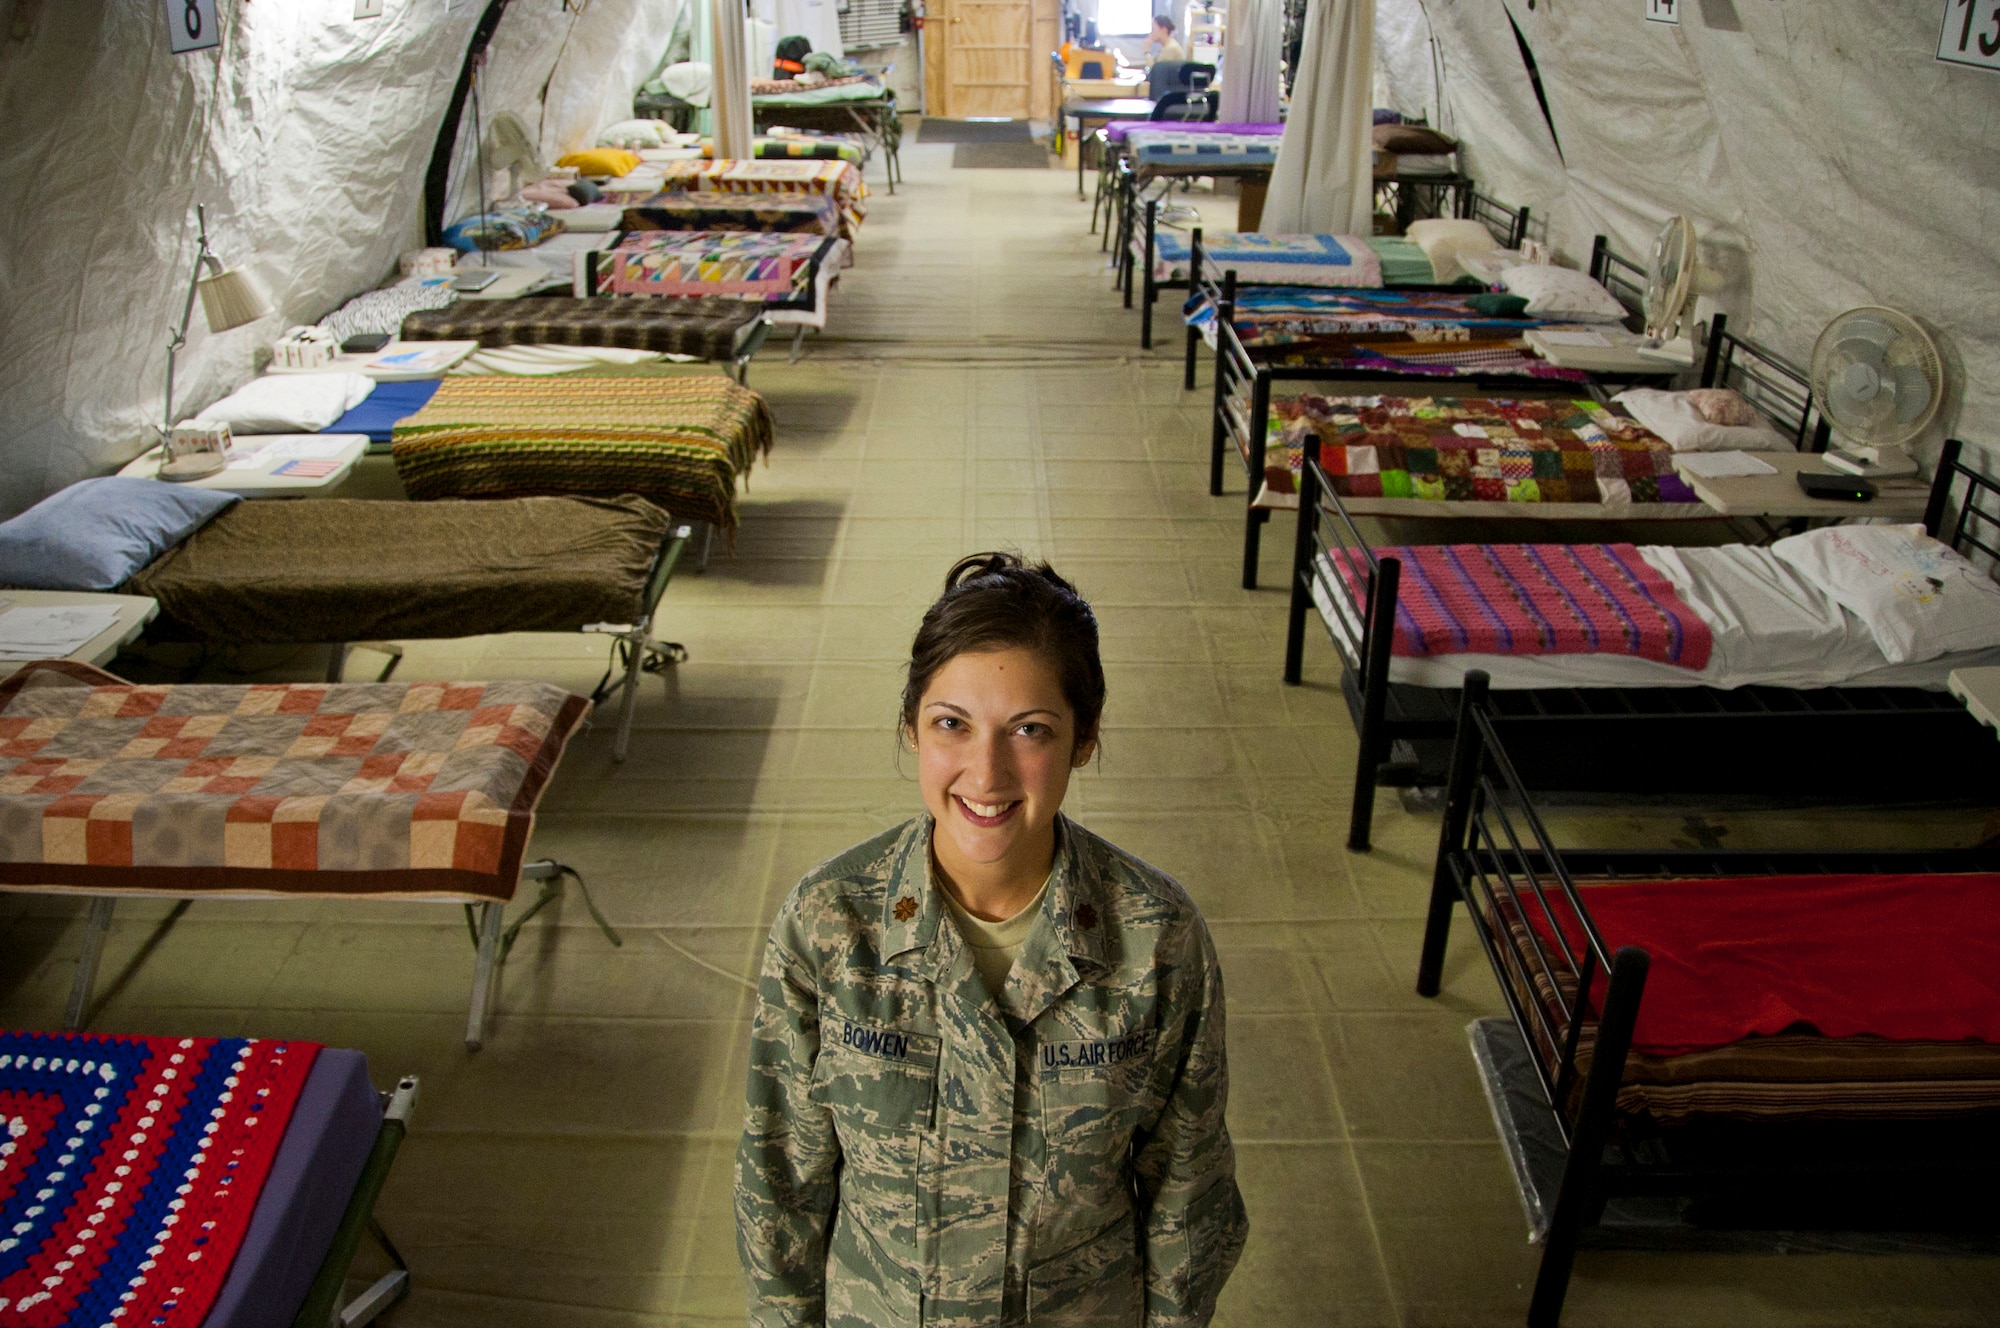 U.S. Air Force Maj. Kelli Bowen, with the 446th Aeromedical Staging Squadron, McChord Field, Wash. adds her warming touch, cooling fans and donated quilts from home to patients' beds at the Contingency Aeromedical Staging Facility at Kandahar Airfield, Afghanistan where she is currently deployed as a CASF administrator.  The CASF is a staging facility designed to provide patient holding capabilities for up to 72 hours and prepares and clears patients for flight to more definitive care.  (U.S. Air Force photo/Senior Airman David Carbajal)